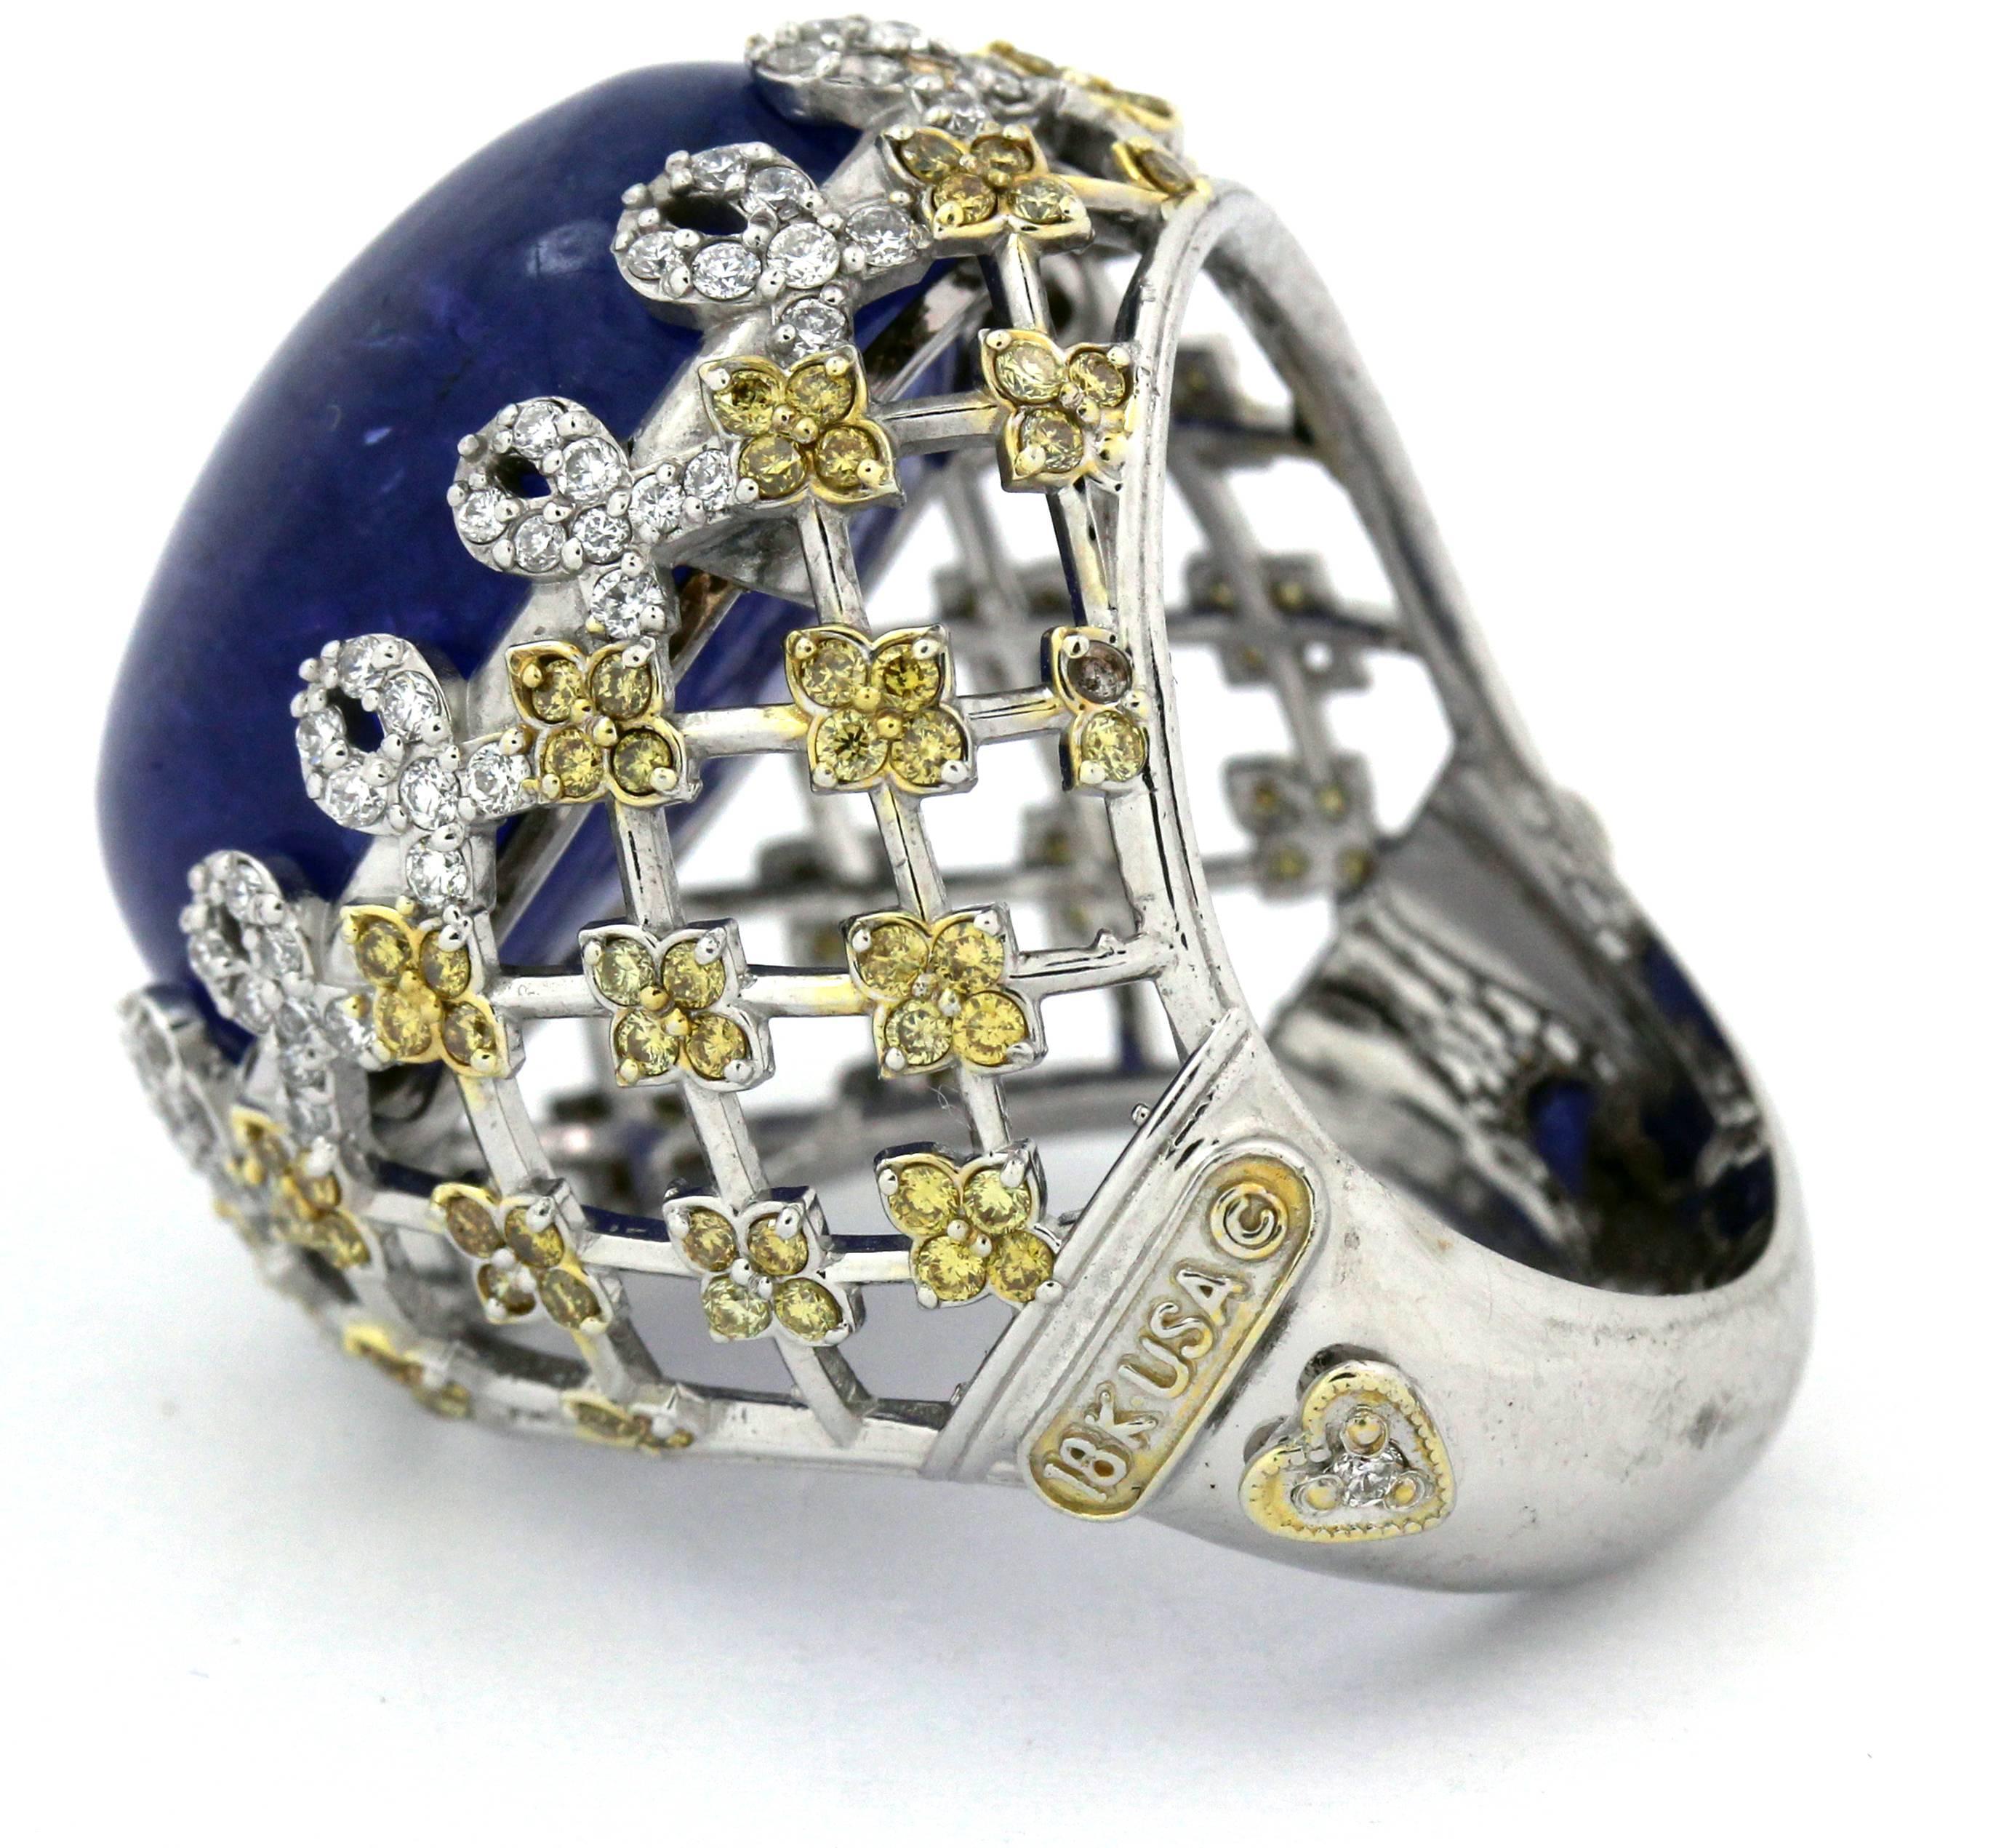 Estate 18K White Gold Ring with Cabochon Tanzanite center and Yellow and White Diamonds by Stambolian

Center Tanzanite, cabochon-cut, 33.70ct. Beautiful, clean stone.

Basket-type ring has yellow and white diamonds on sides.
0.60ct. apprx. G Color,